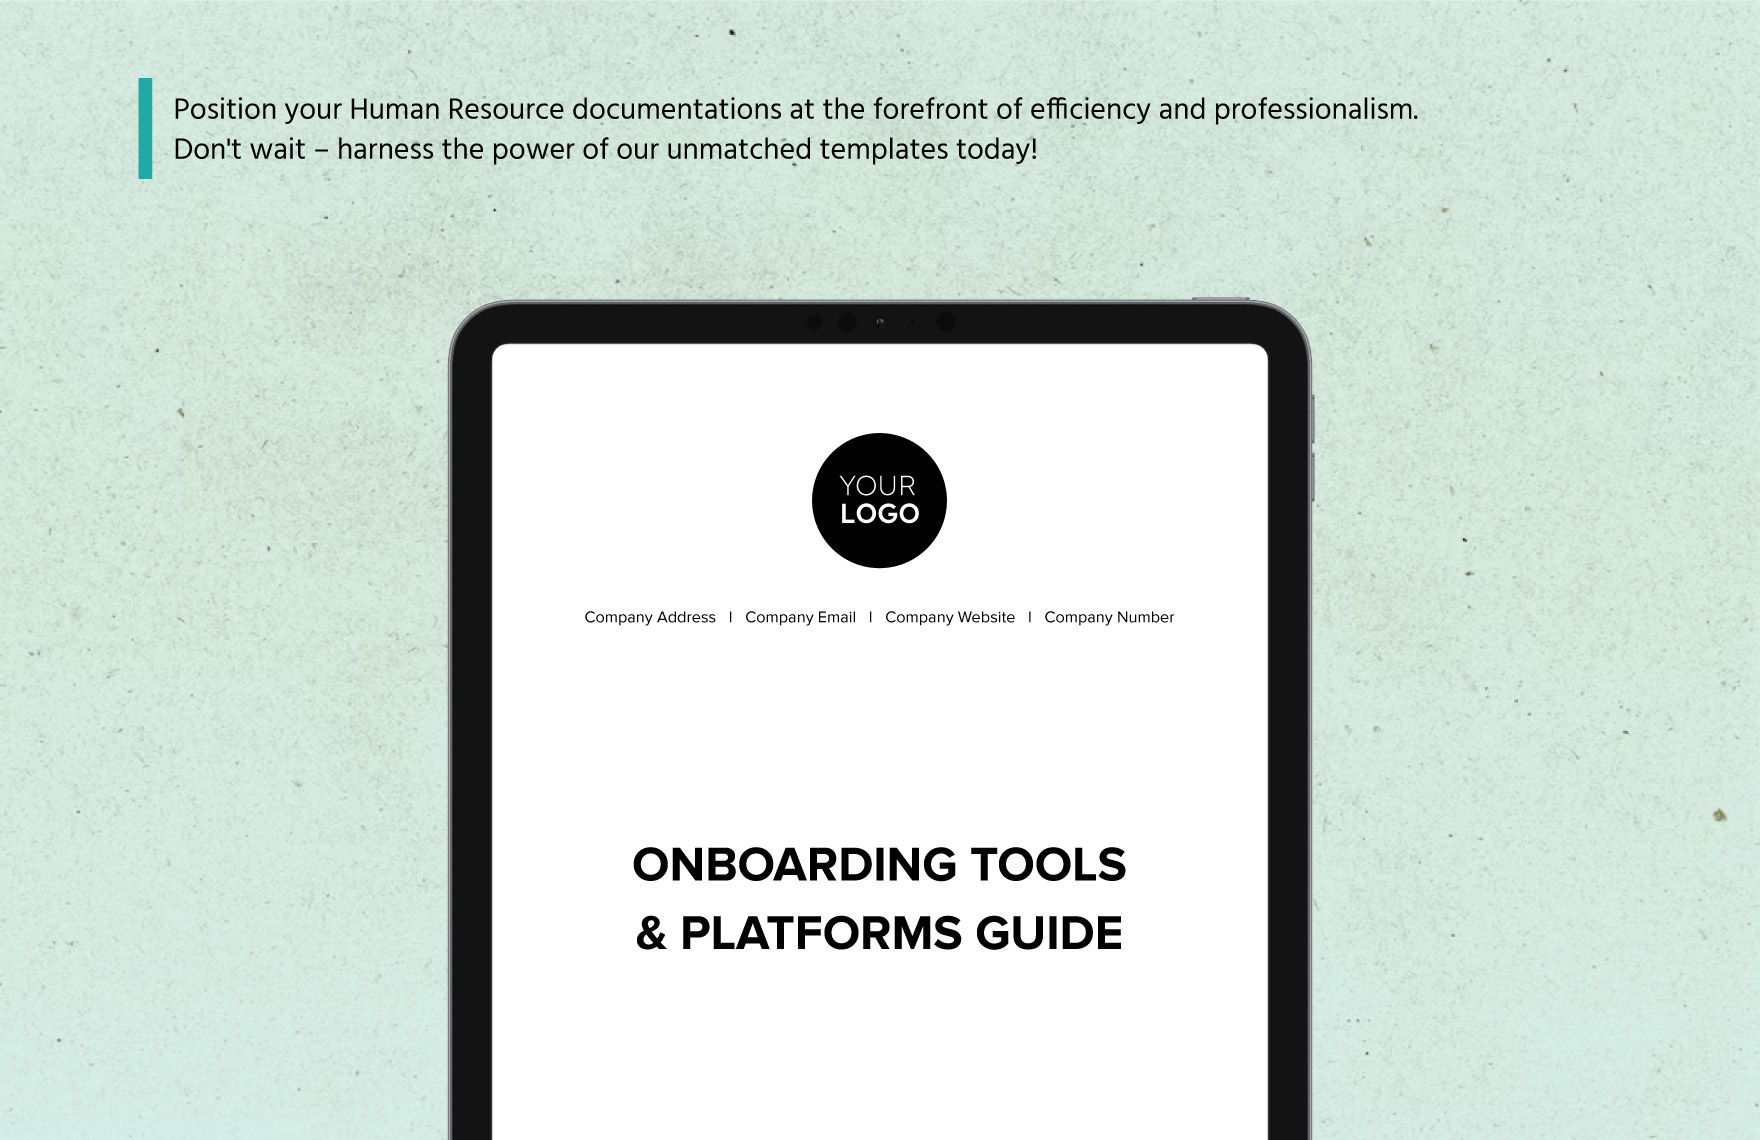 Onboarding Tools & Platforms Guide HR Template